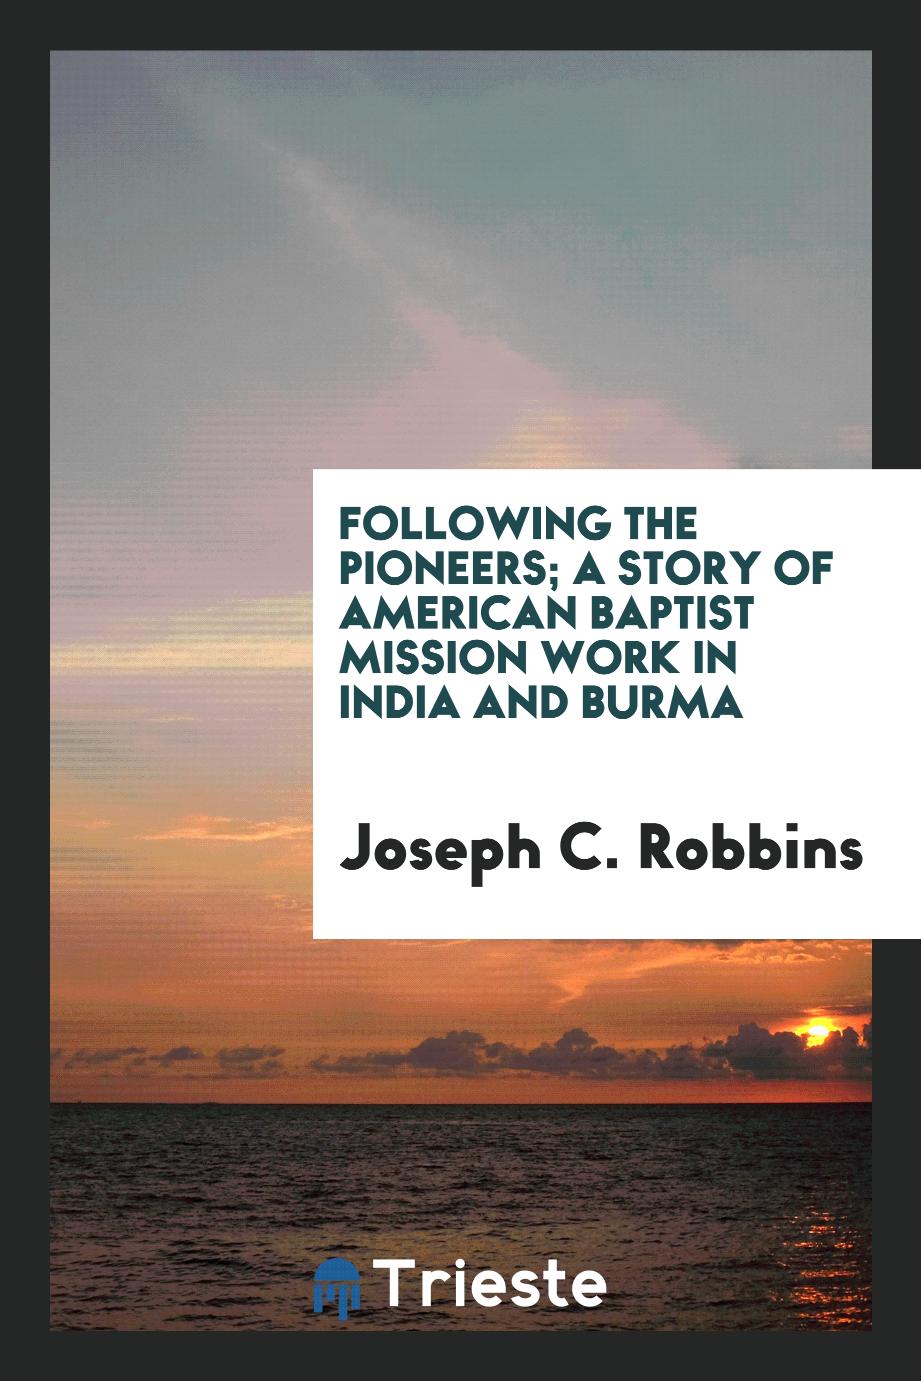 Following the pioneers; a story of American Baptist mission work in India and Burma